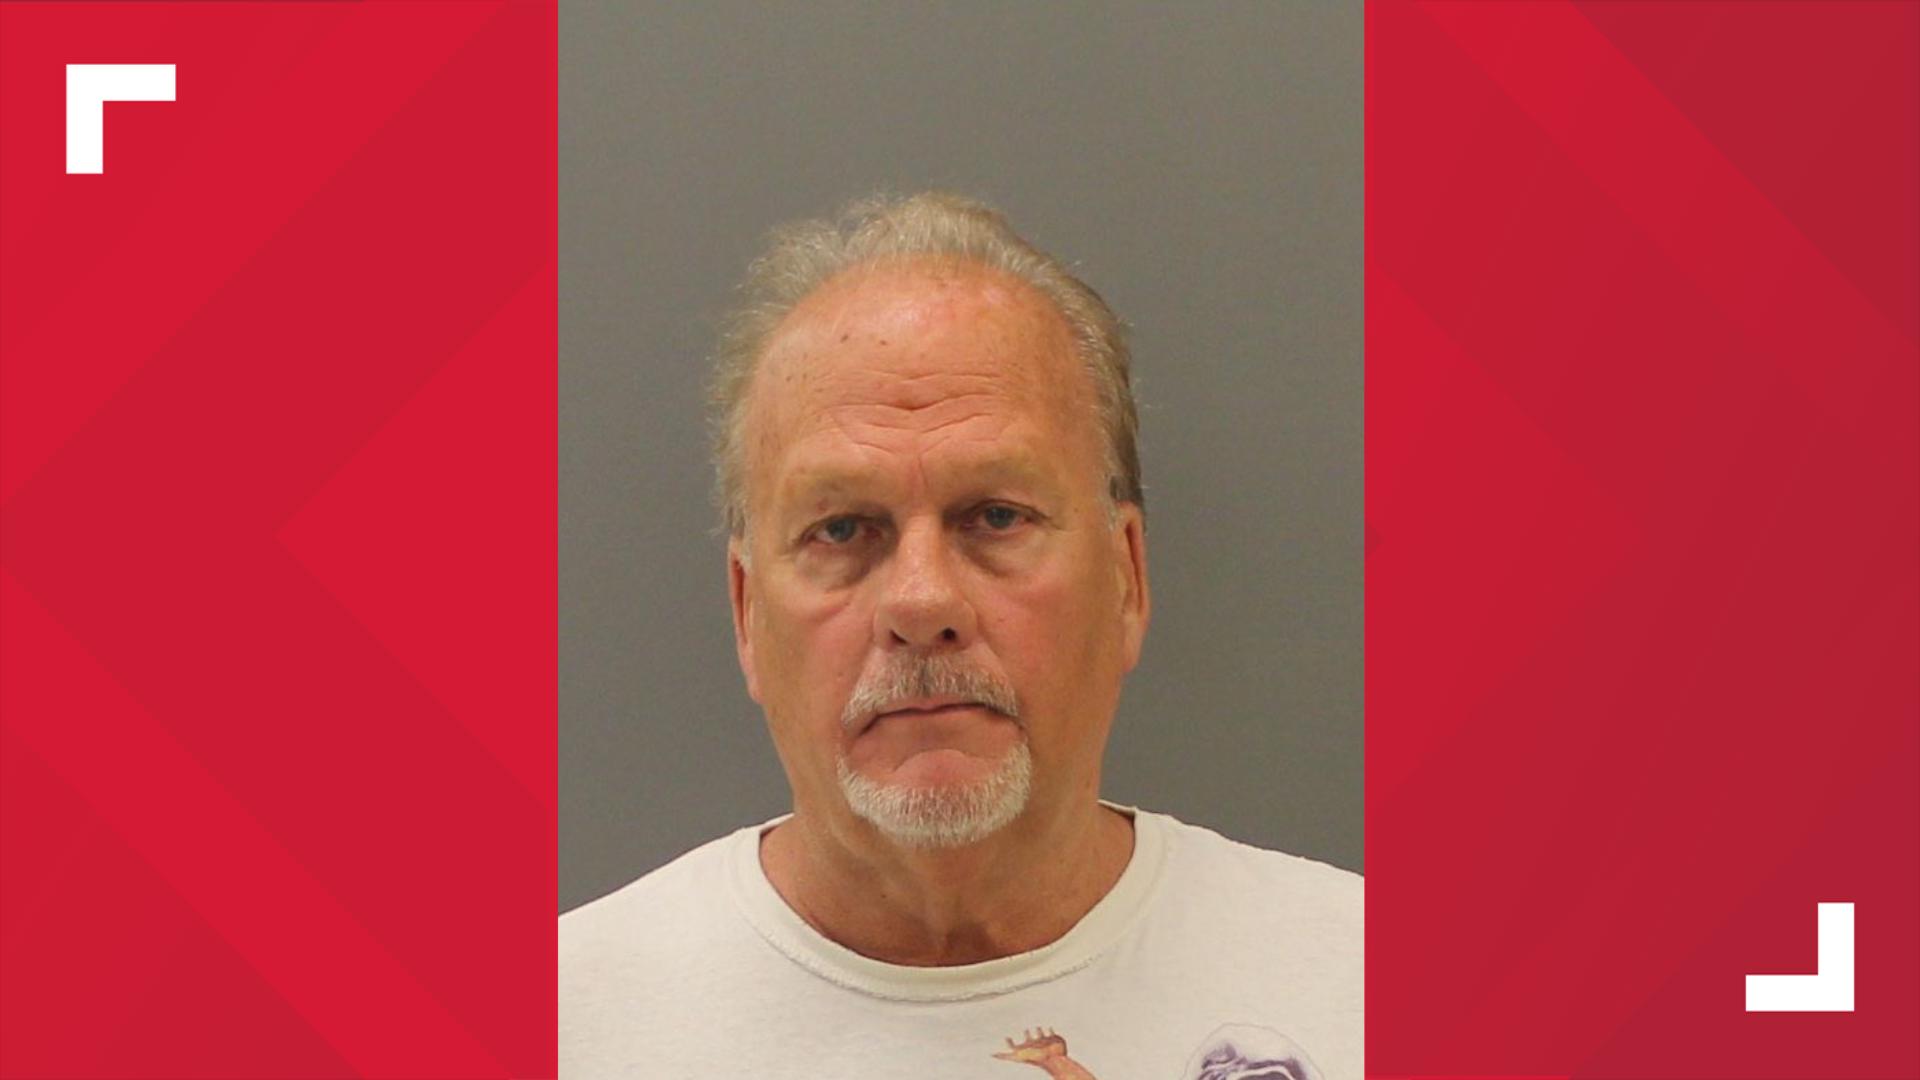 According to court documents, 68-year-old Robert Linscott has a prior history of indecent exposure.